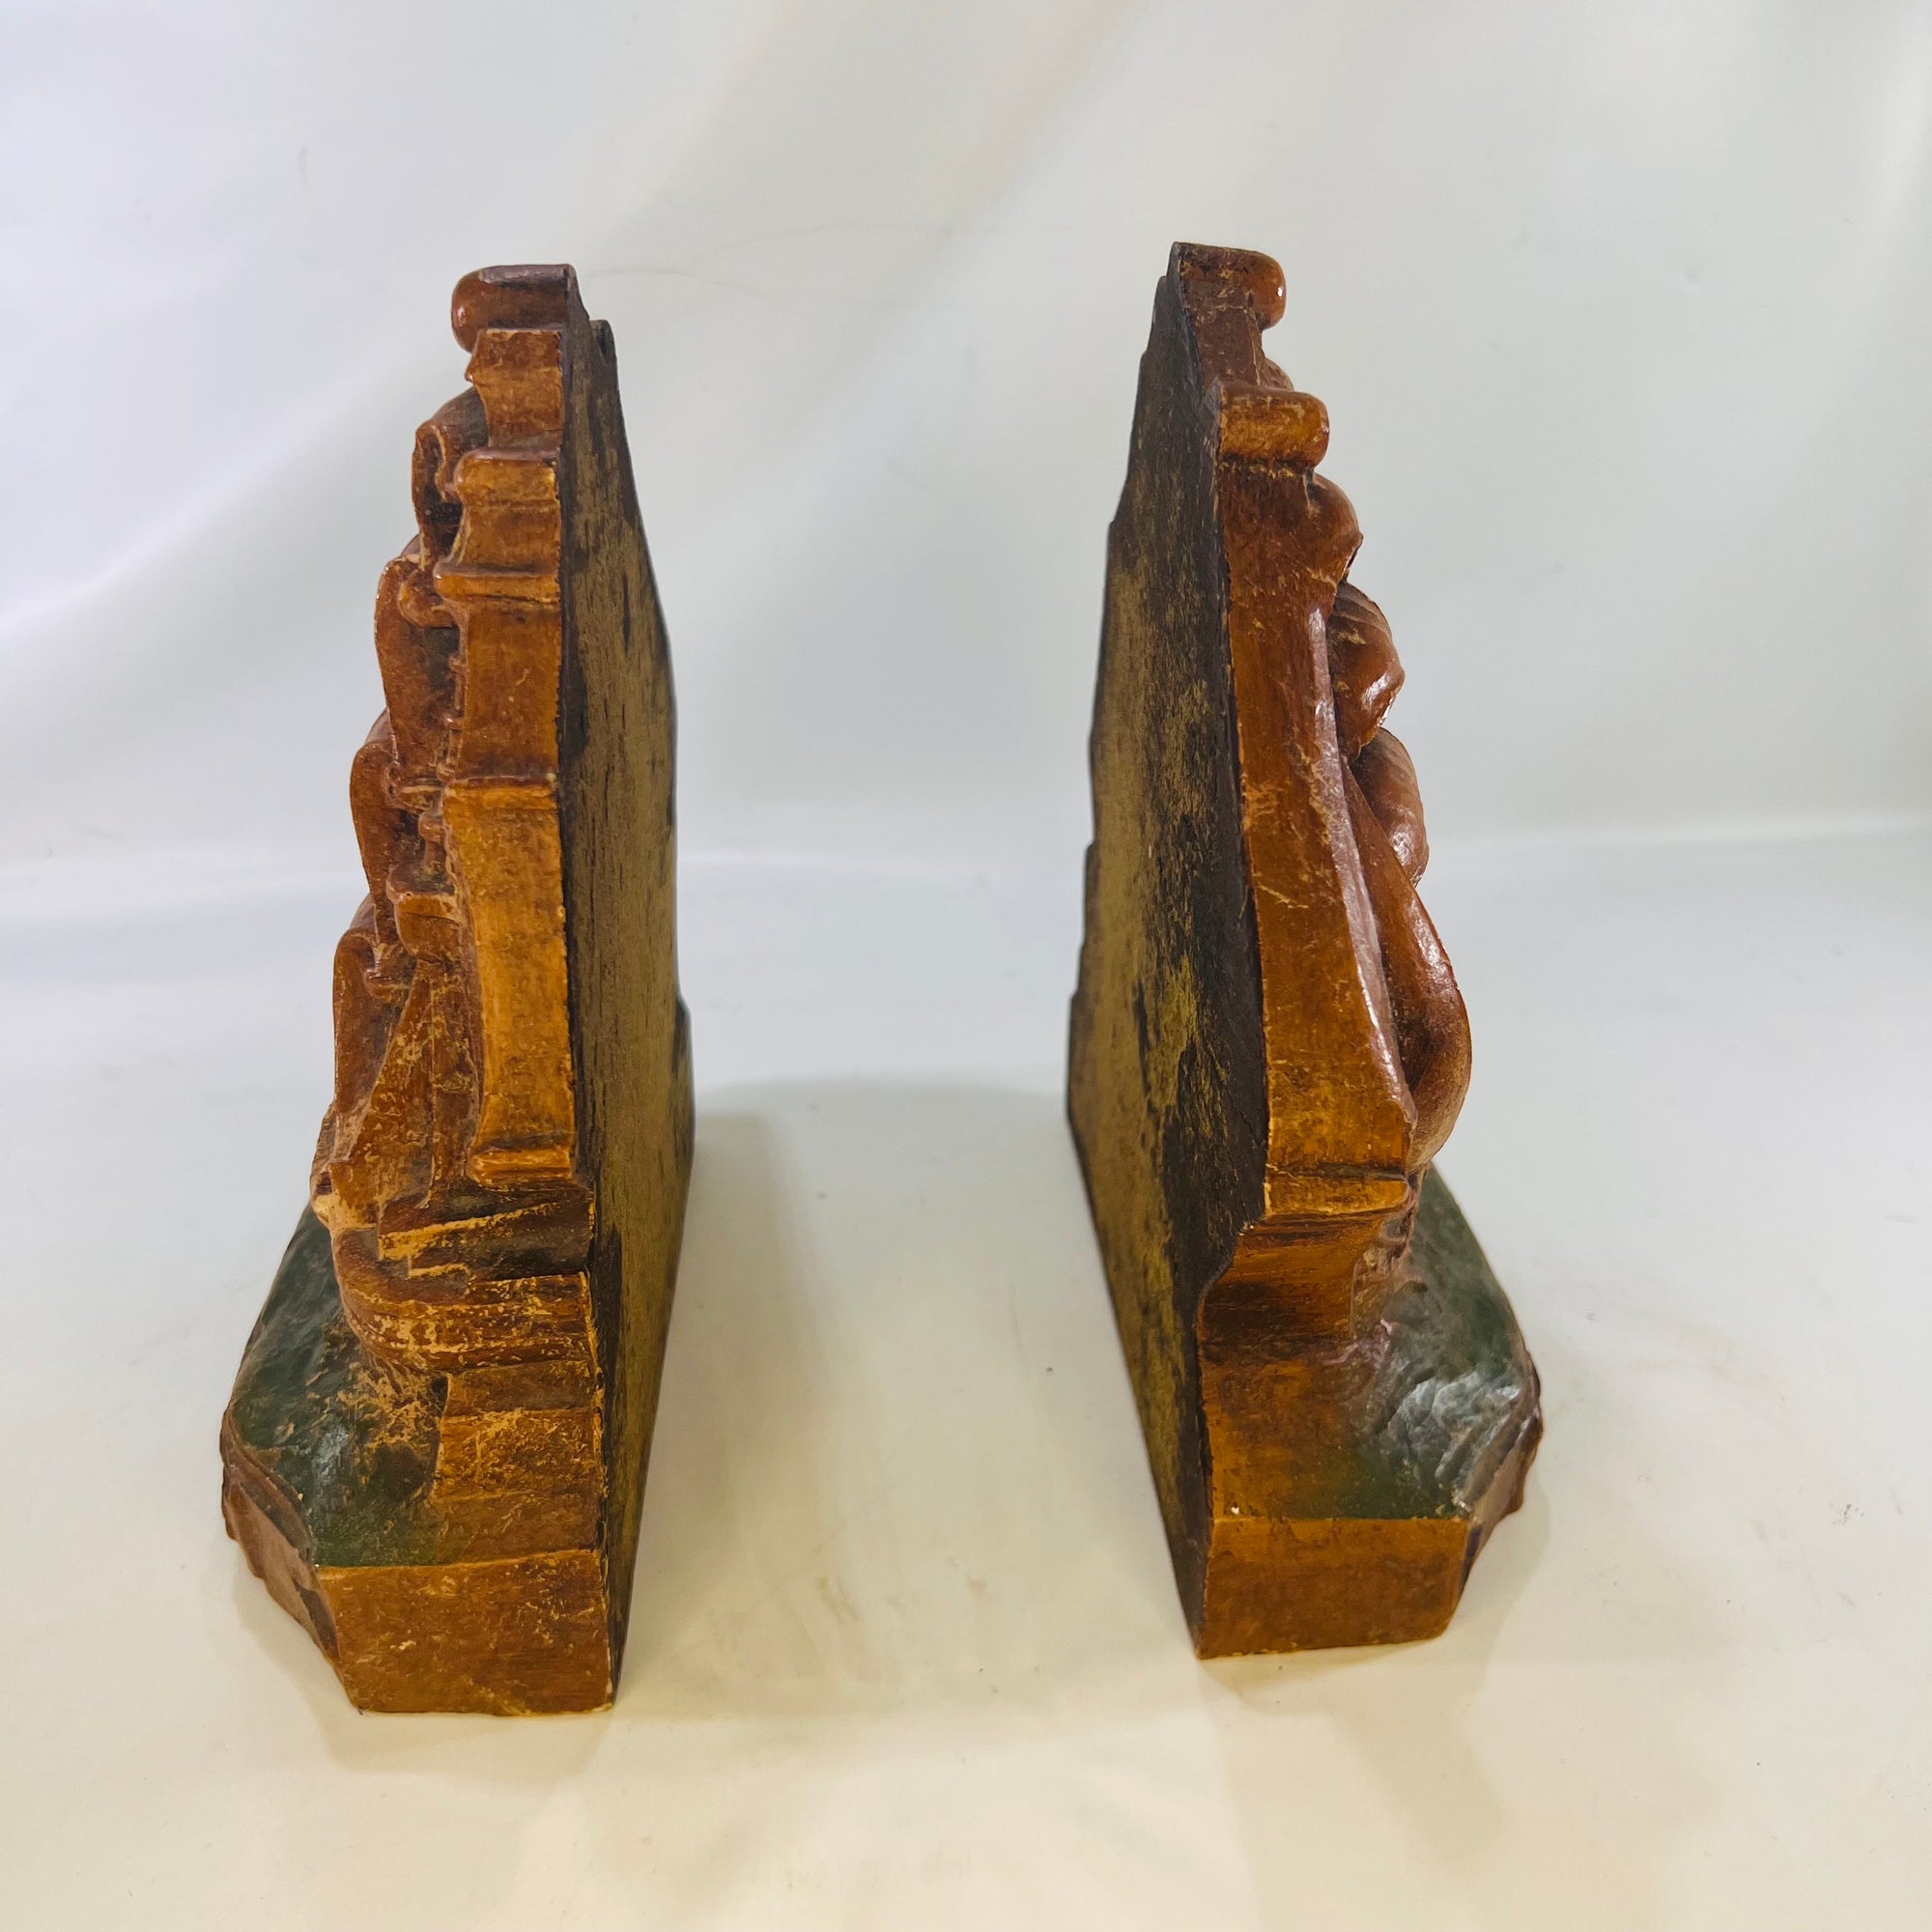 Pair of Old Ironside USS Constitution Ship Wooden Bookends 1940s  Decorative Tall Ships for your Library